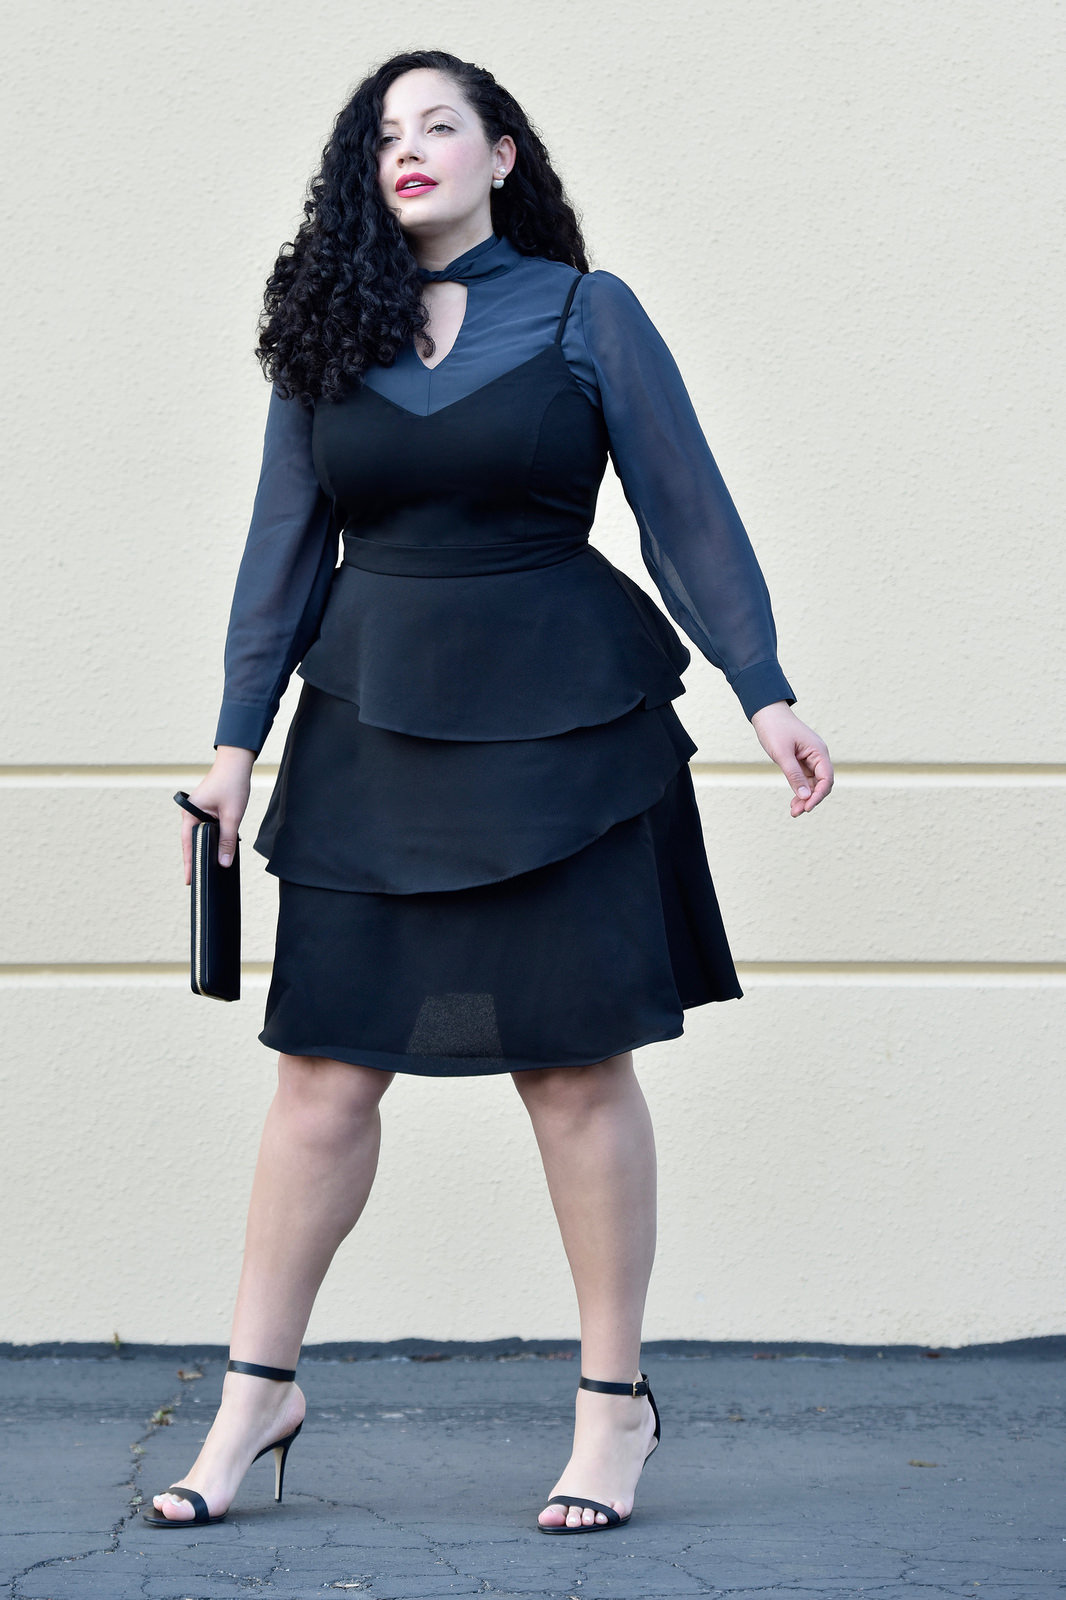 Featuring Blouse and Dress from City Chic, Wallet from Tory Burch via @GirlwithCurves